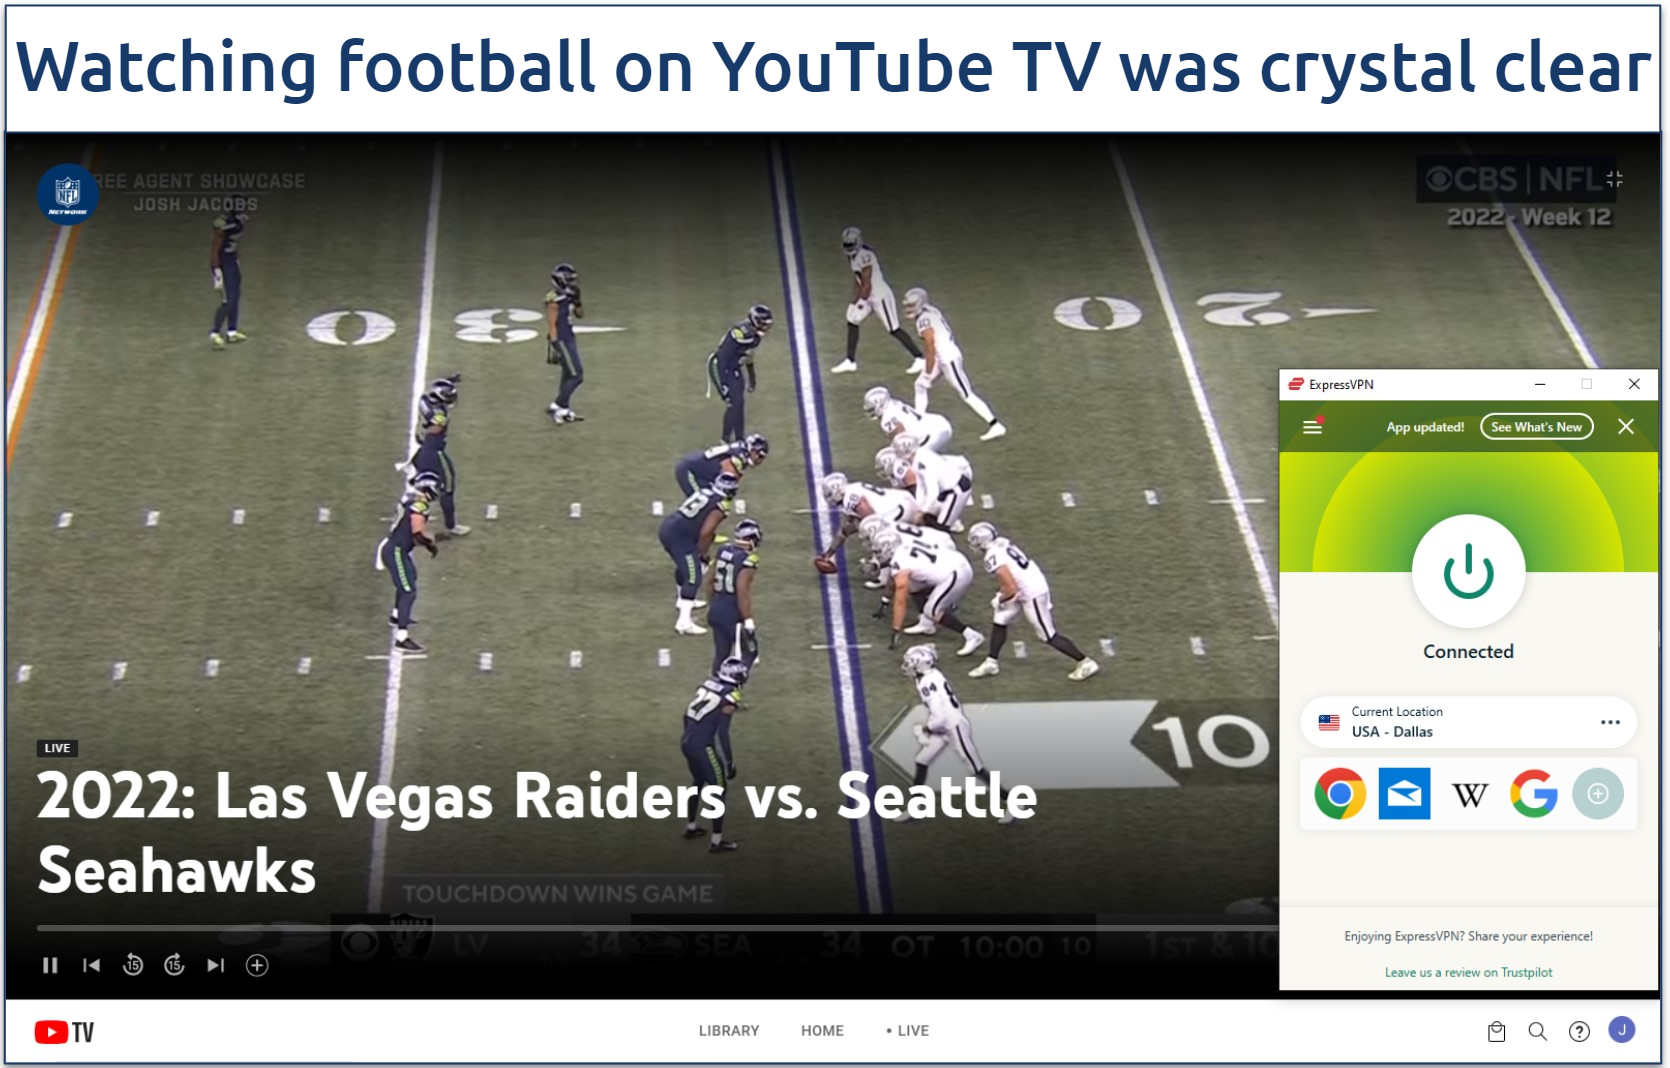 Screenshot showing an NFL match playing on YouTube TV with ExpressVPN connected to the Dallas server